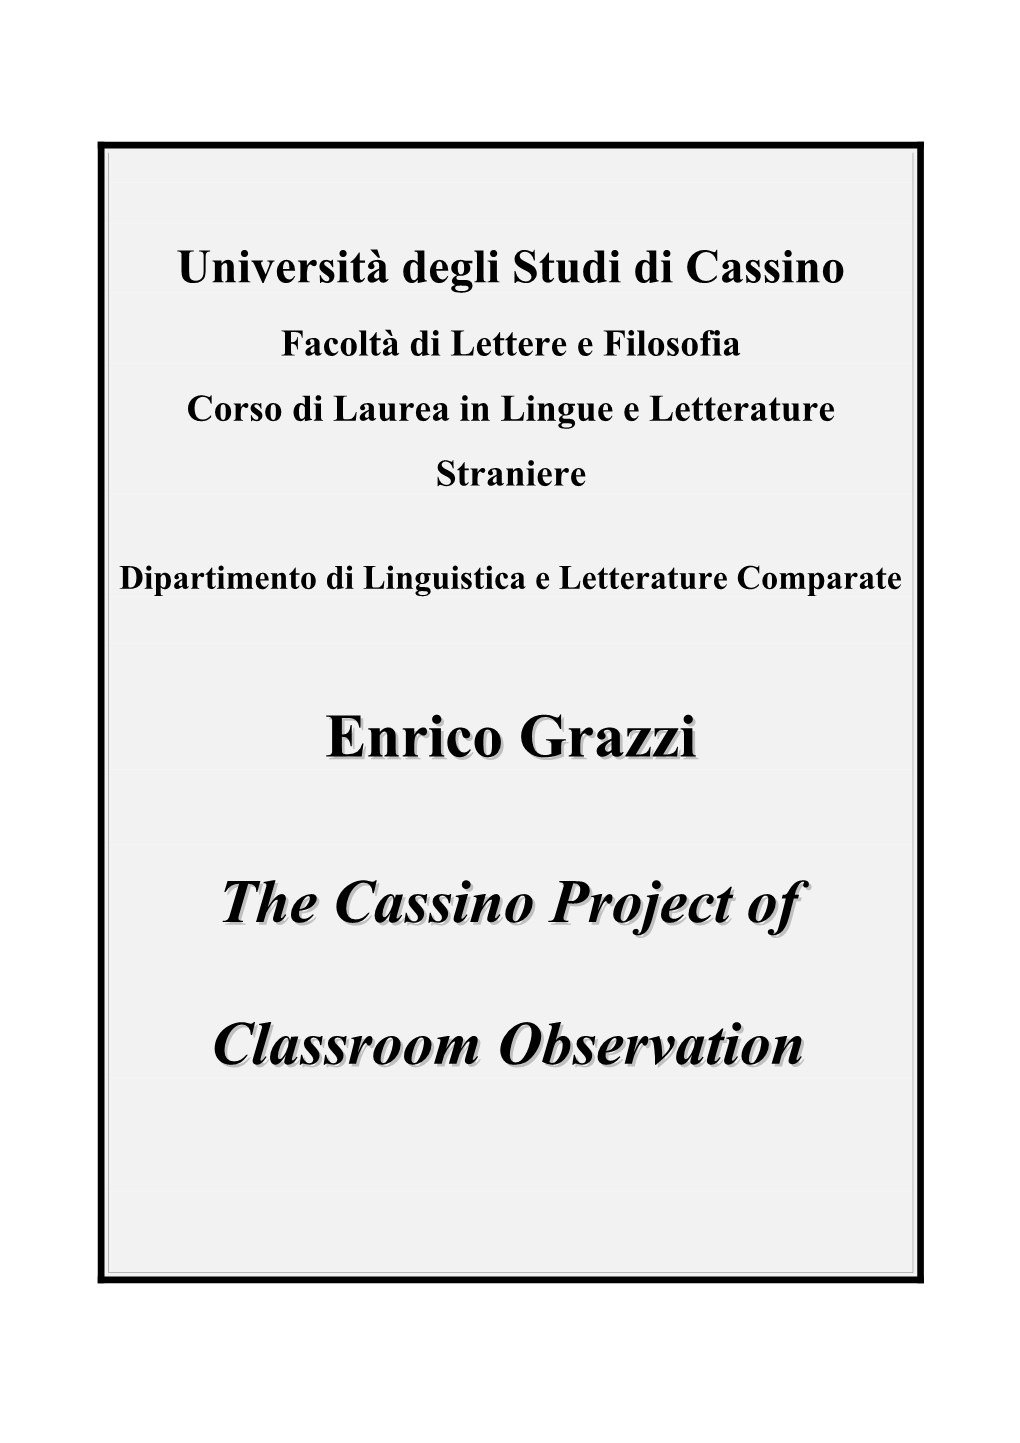 Enrico Grazzithe Cassino Project of Classroom Observation